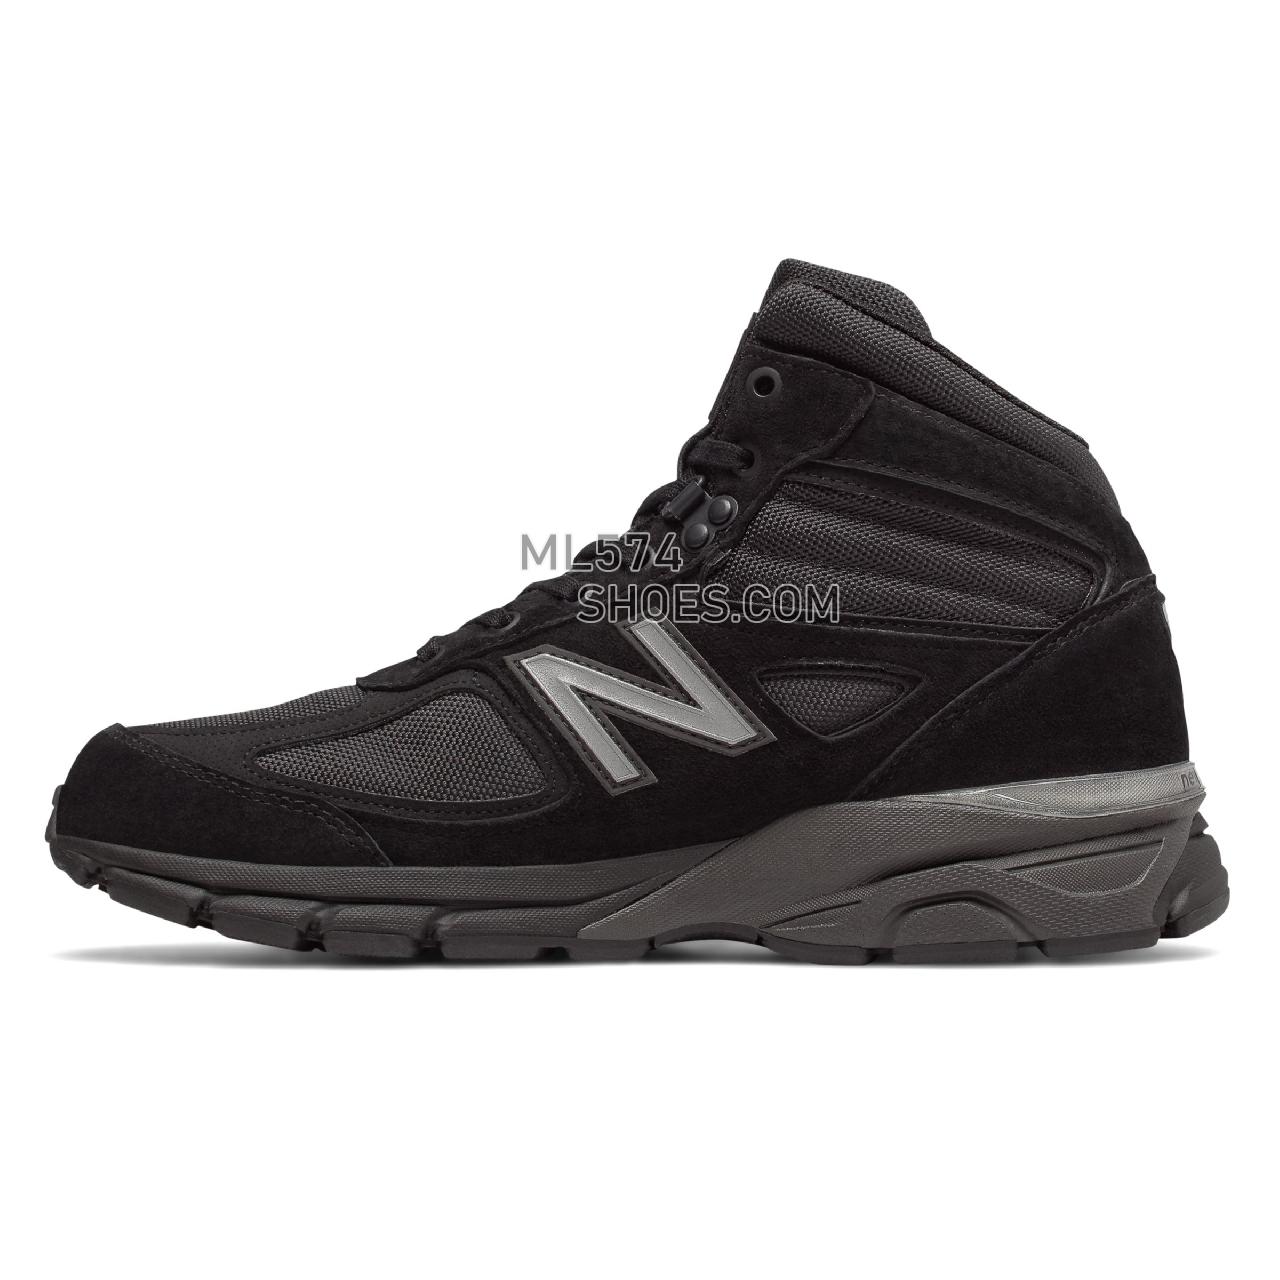 New Balance Mens 990v4 Mid Made in US - Men's 990 - Boots Black with Grey - MO990BK4